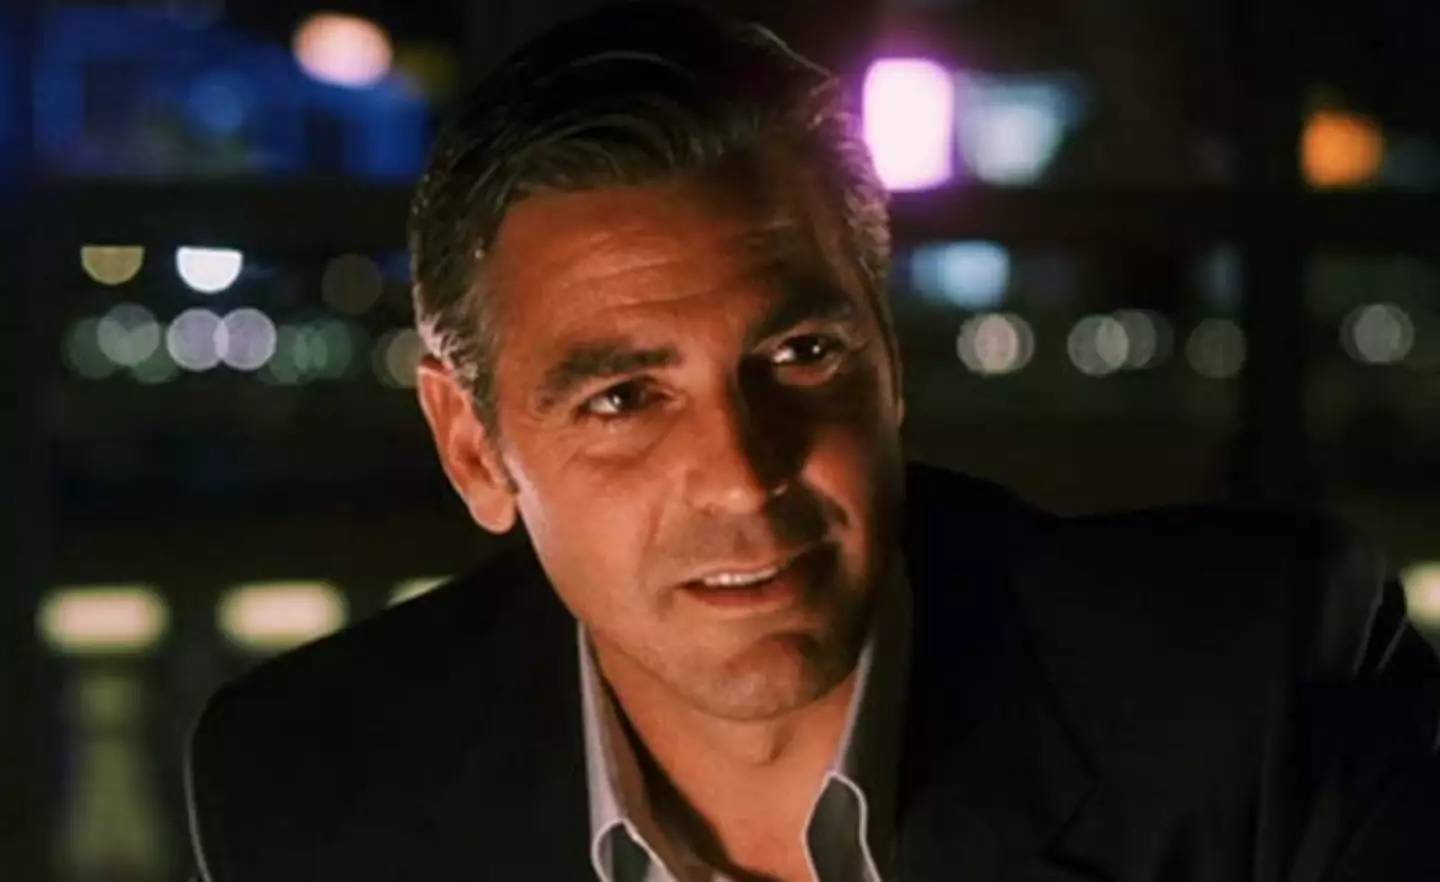 Clooney stars as Danny Ocean in the franchise.